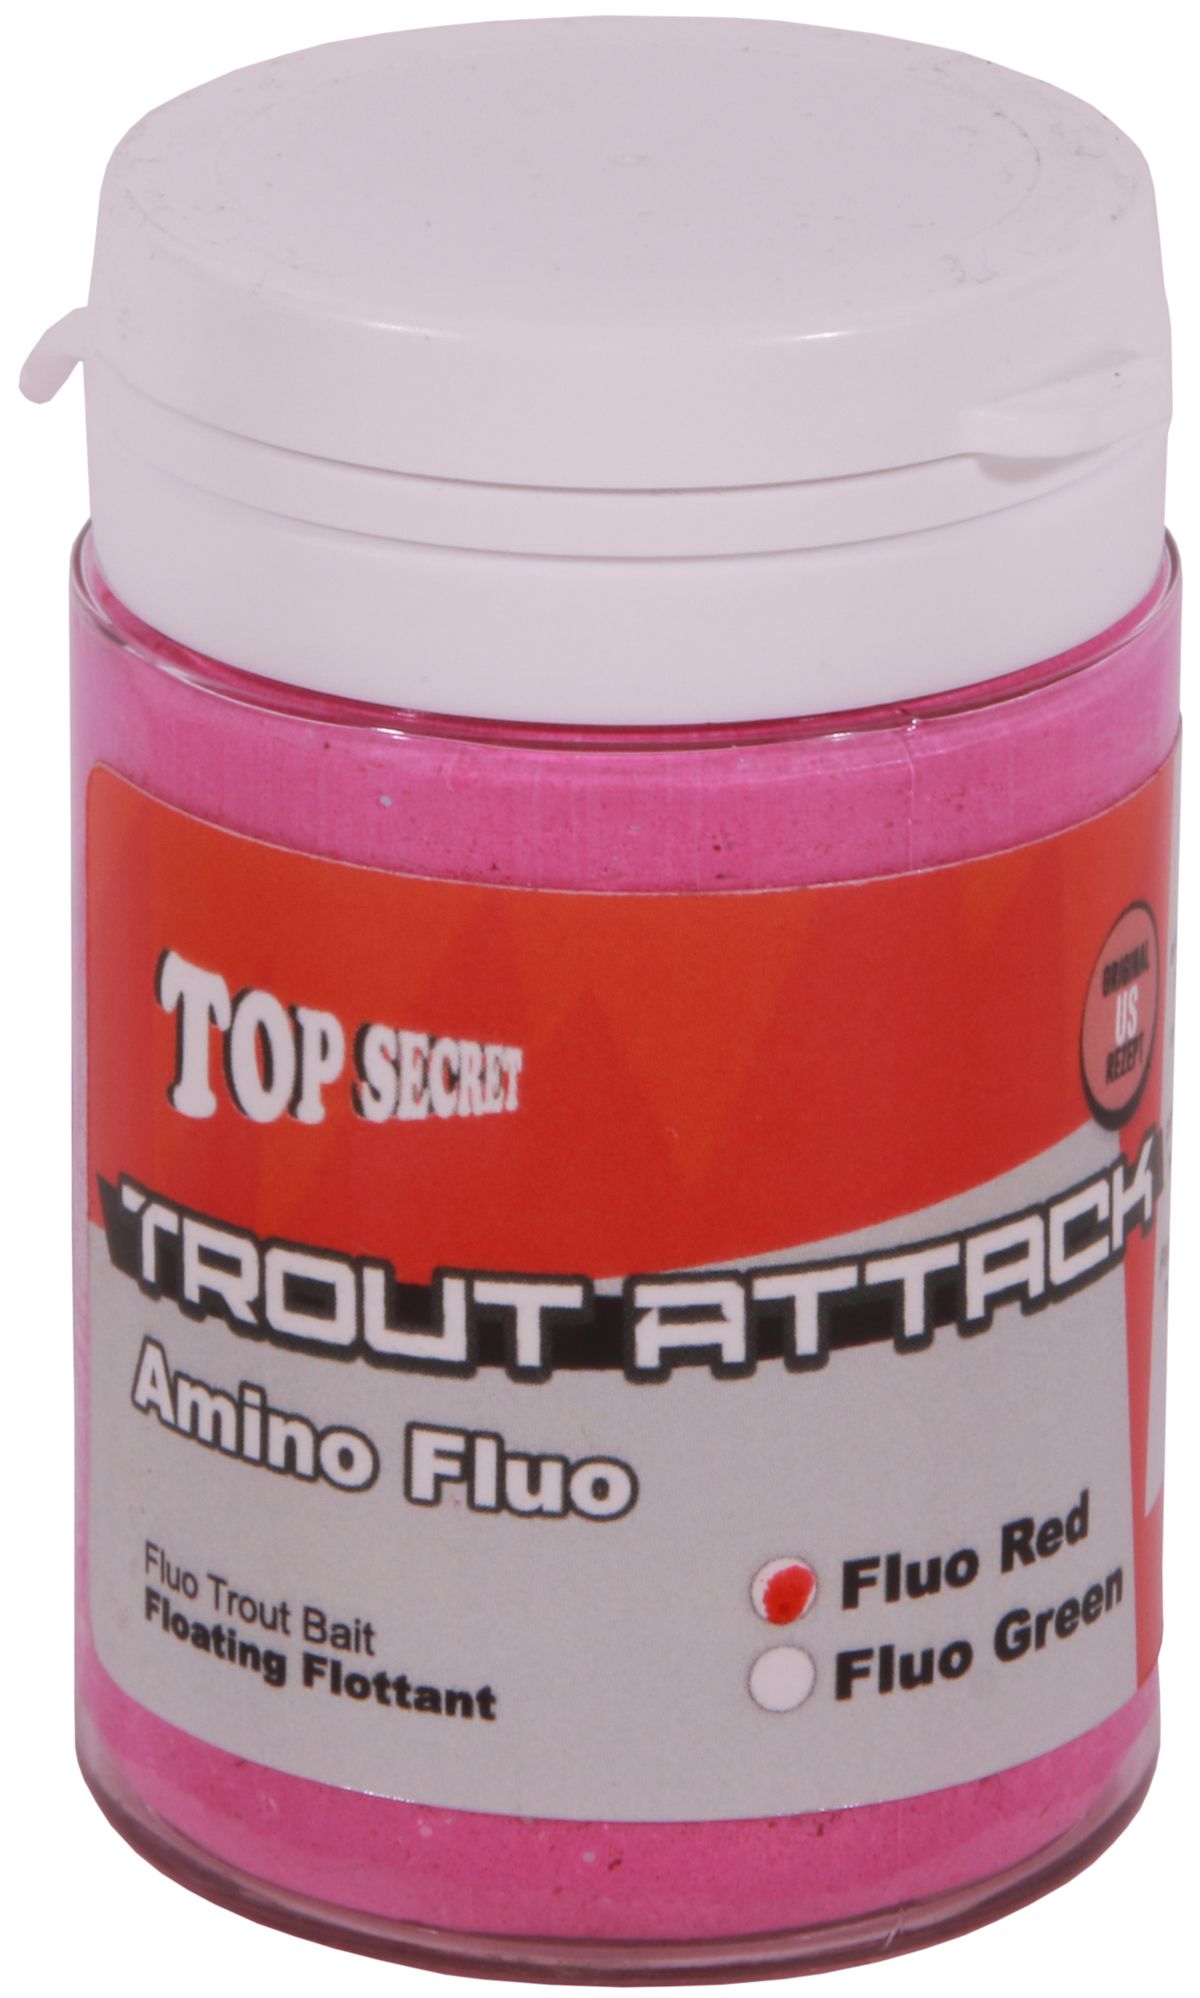 Top Secret Trout Attac Fluo 60g - Pink Red